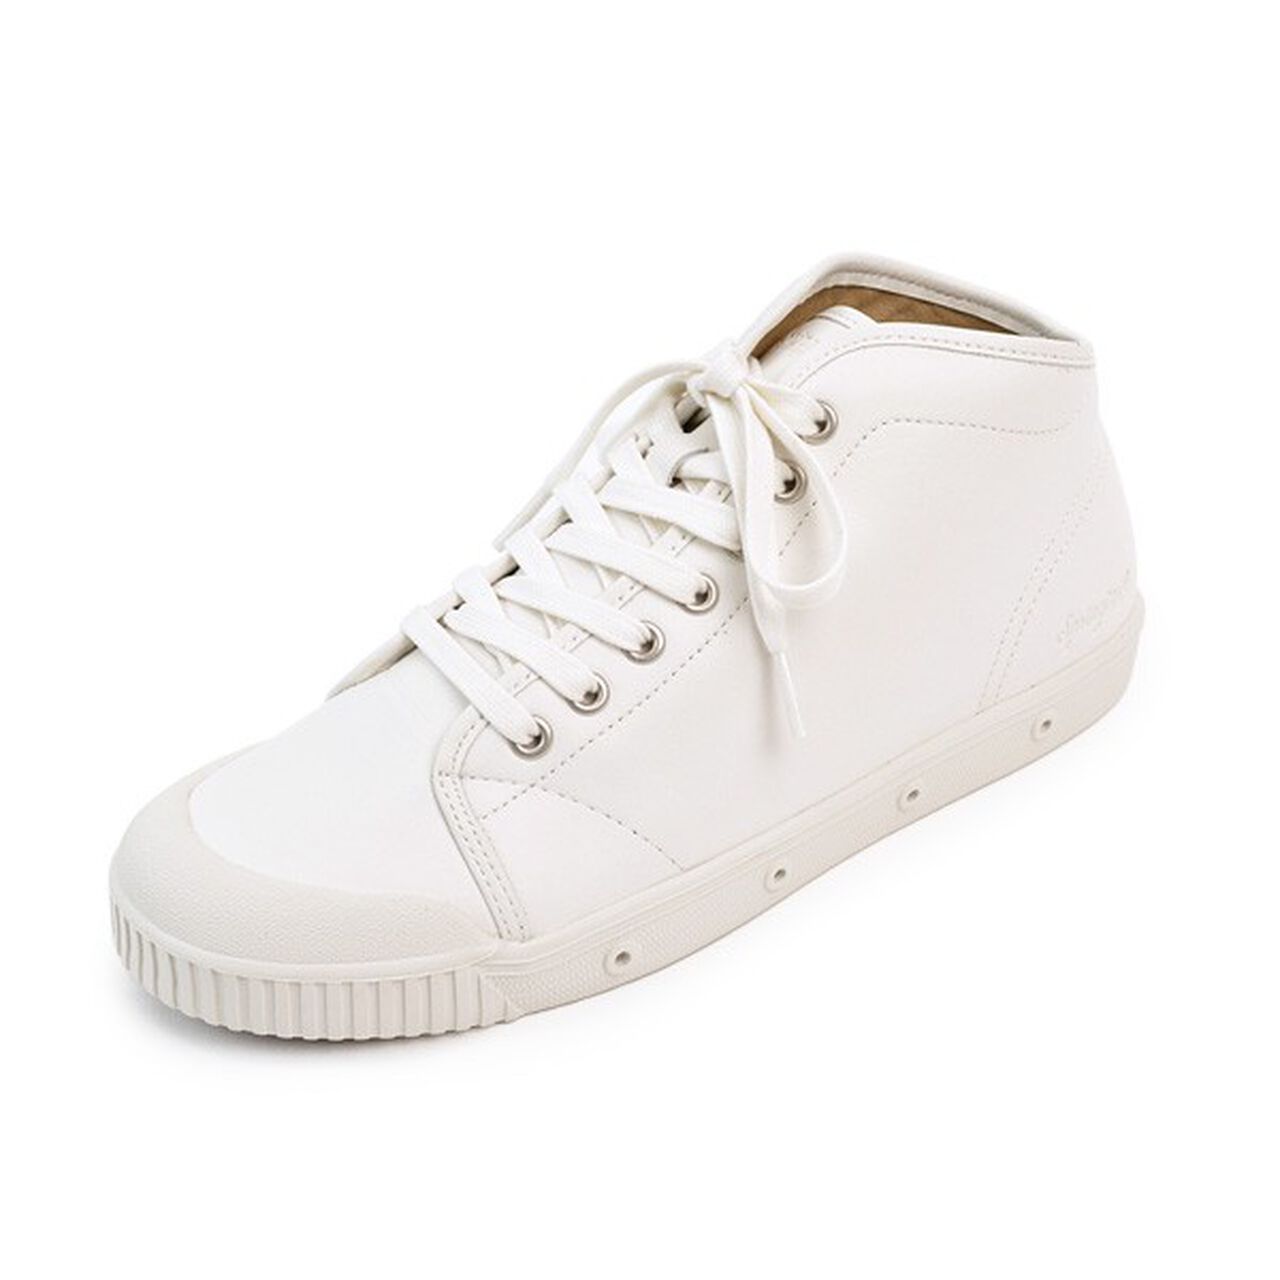 B2 Mid Cut Leather Sneakers,White, large image number 0